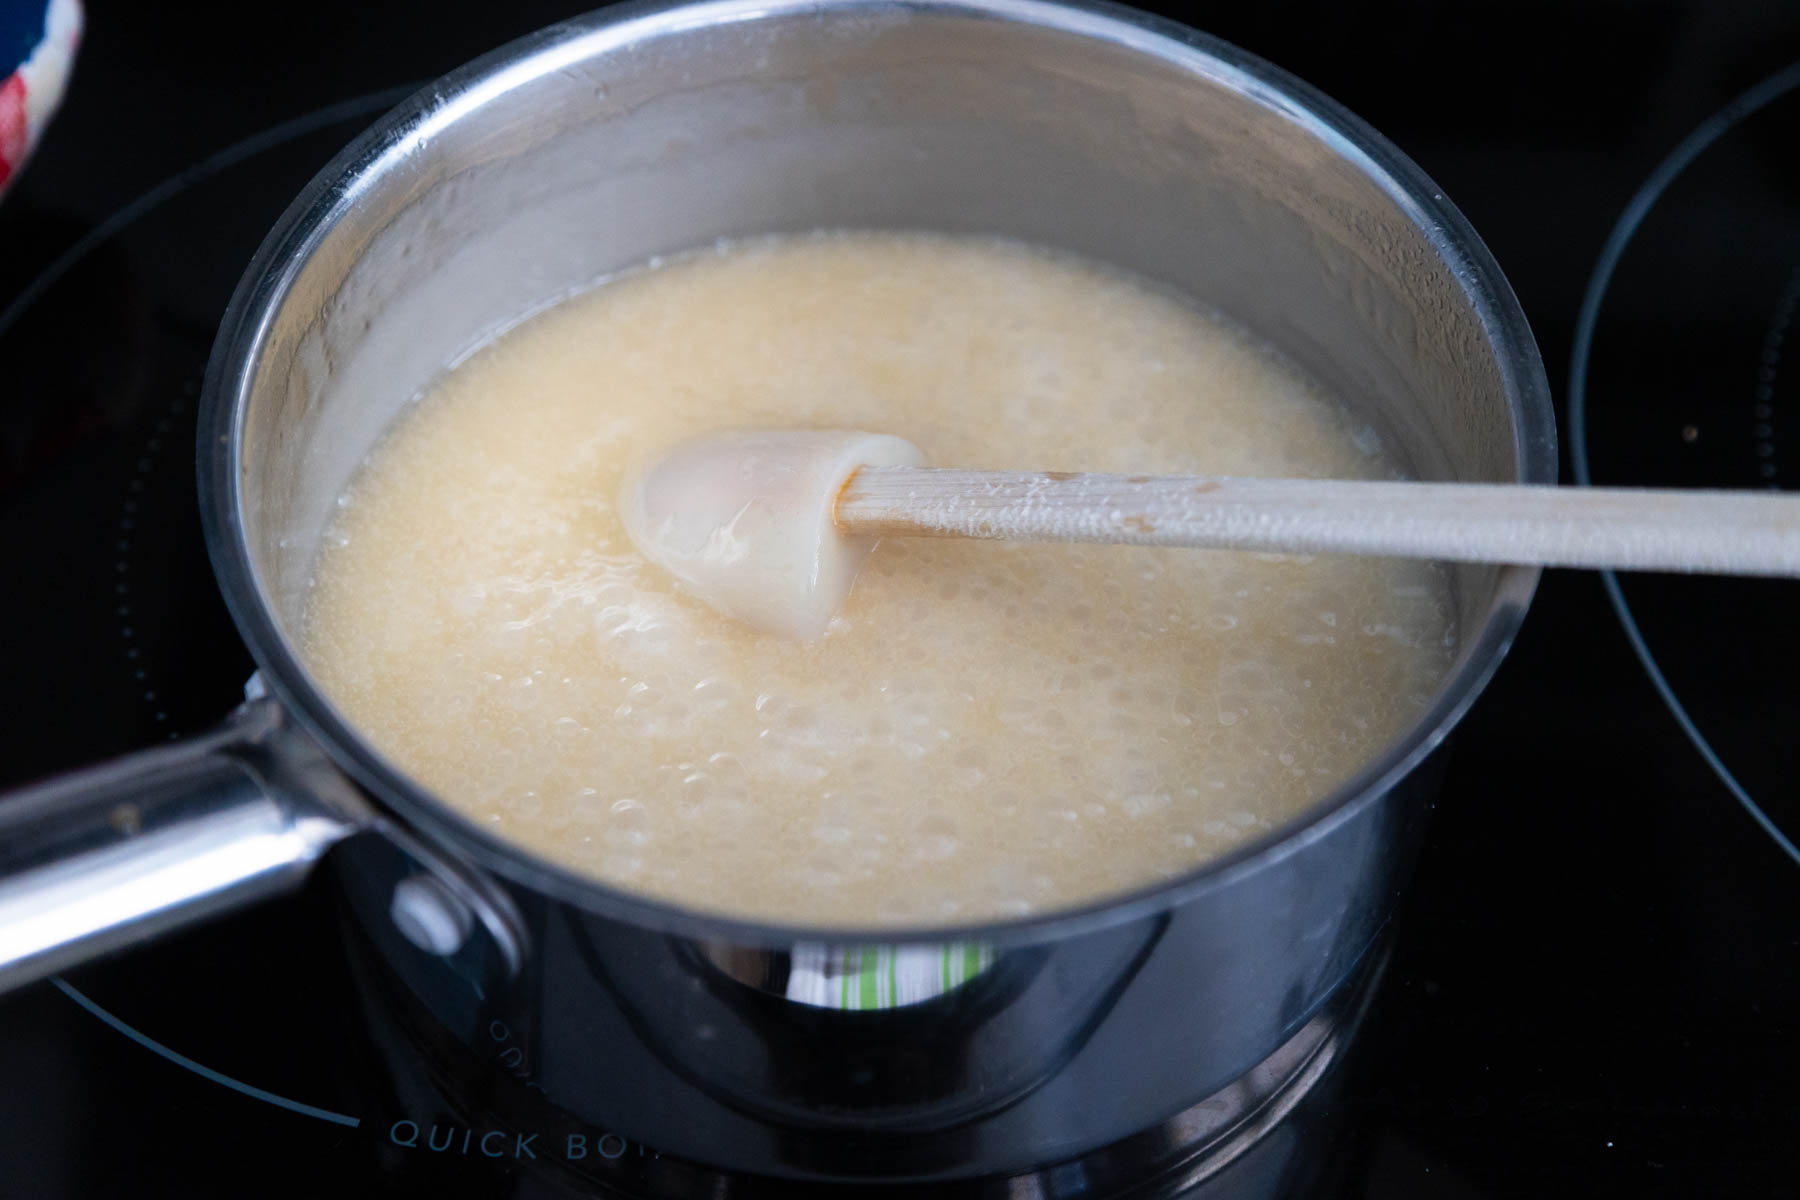 The butter and sugar are cooking in a saucepan.